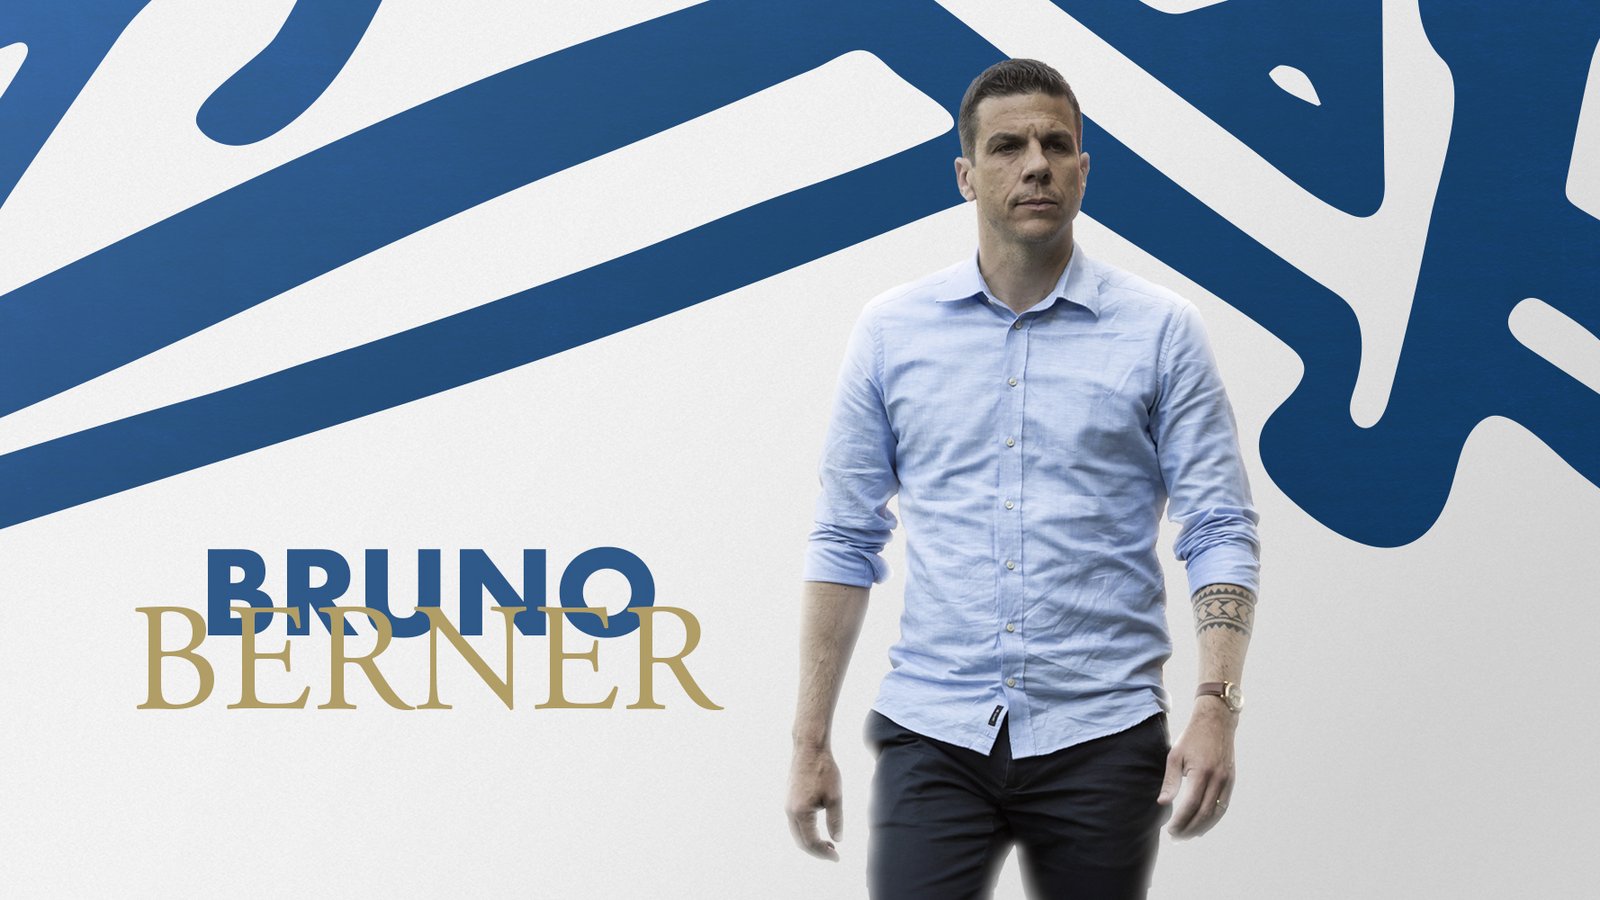 BRUNO BERNER BECOMES THE NEW HEAD COACH